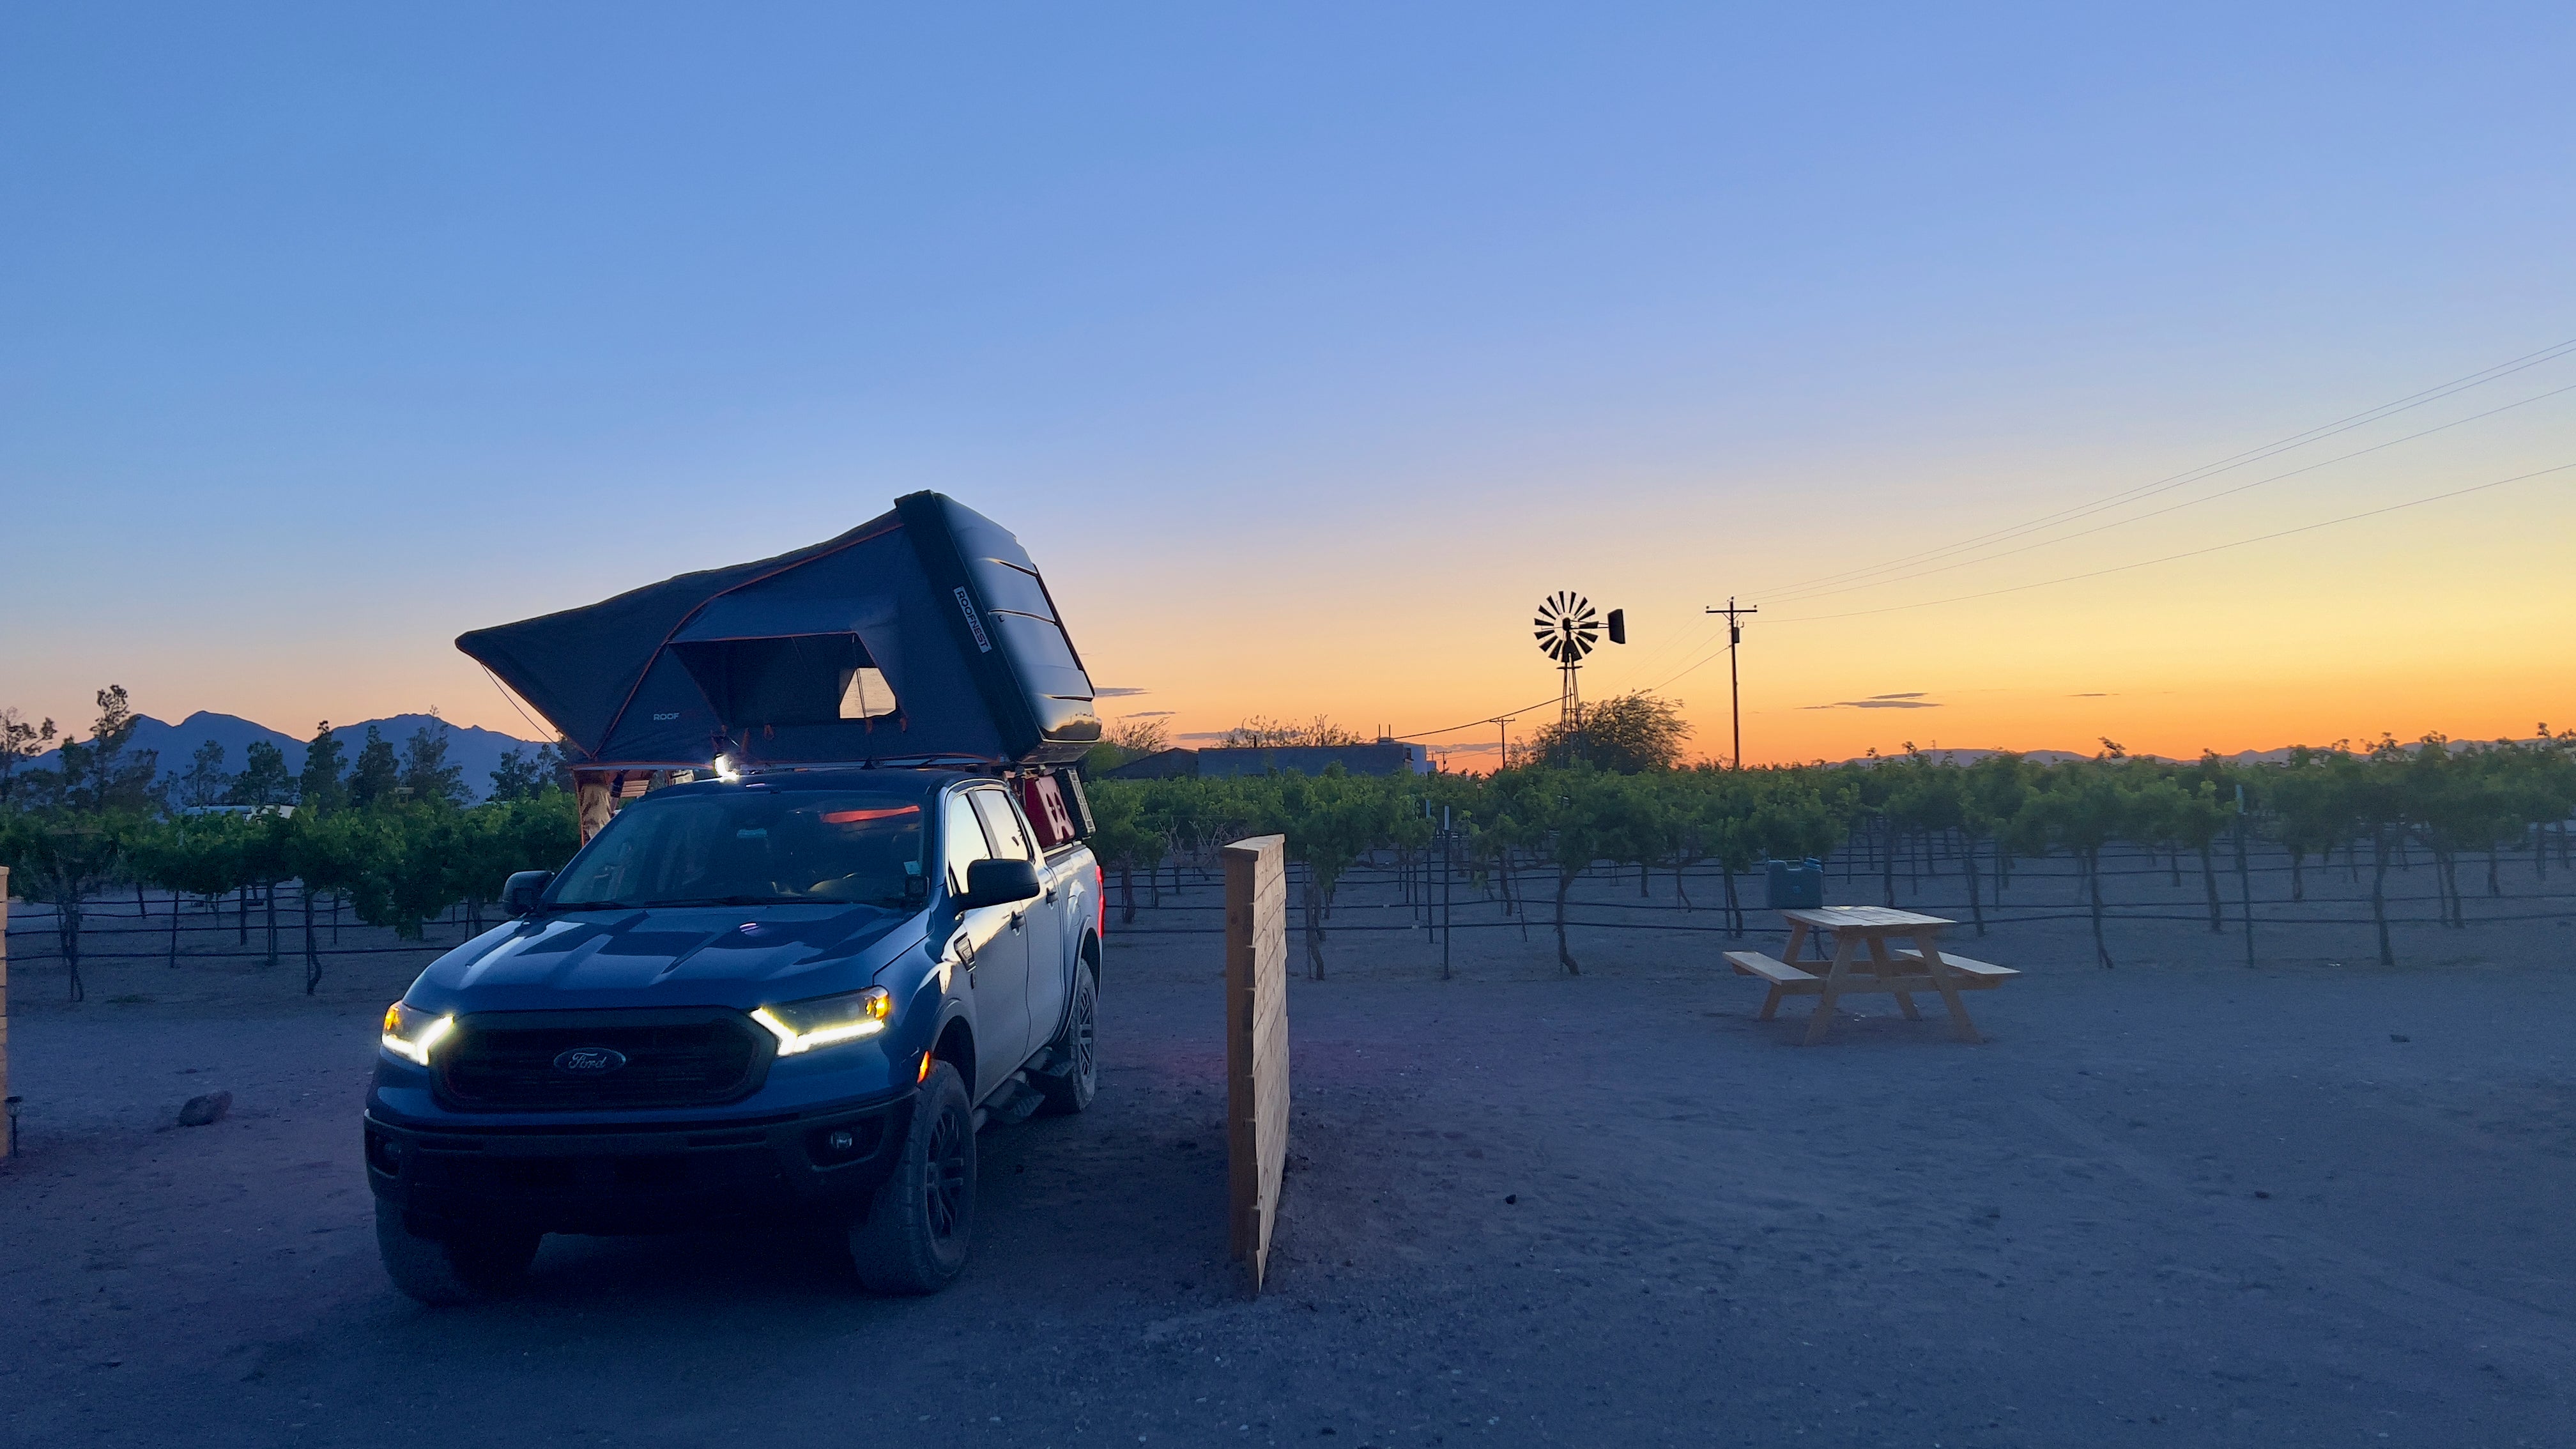 Camper submitted image from DeathValley Camp - 3